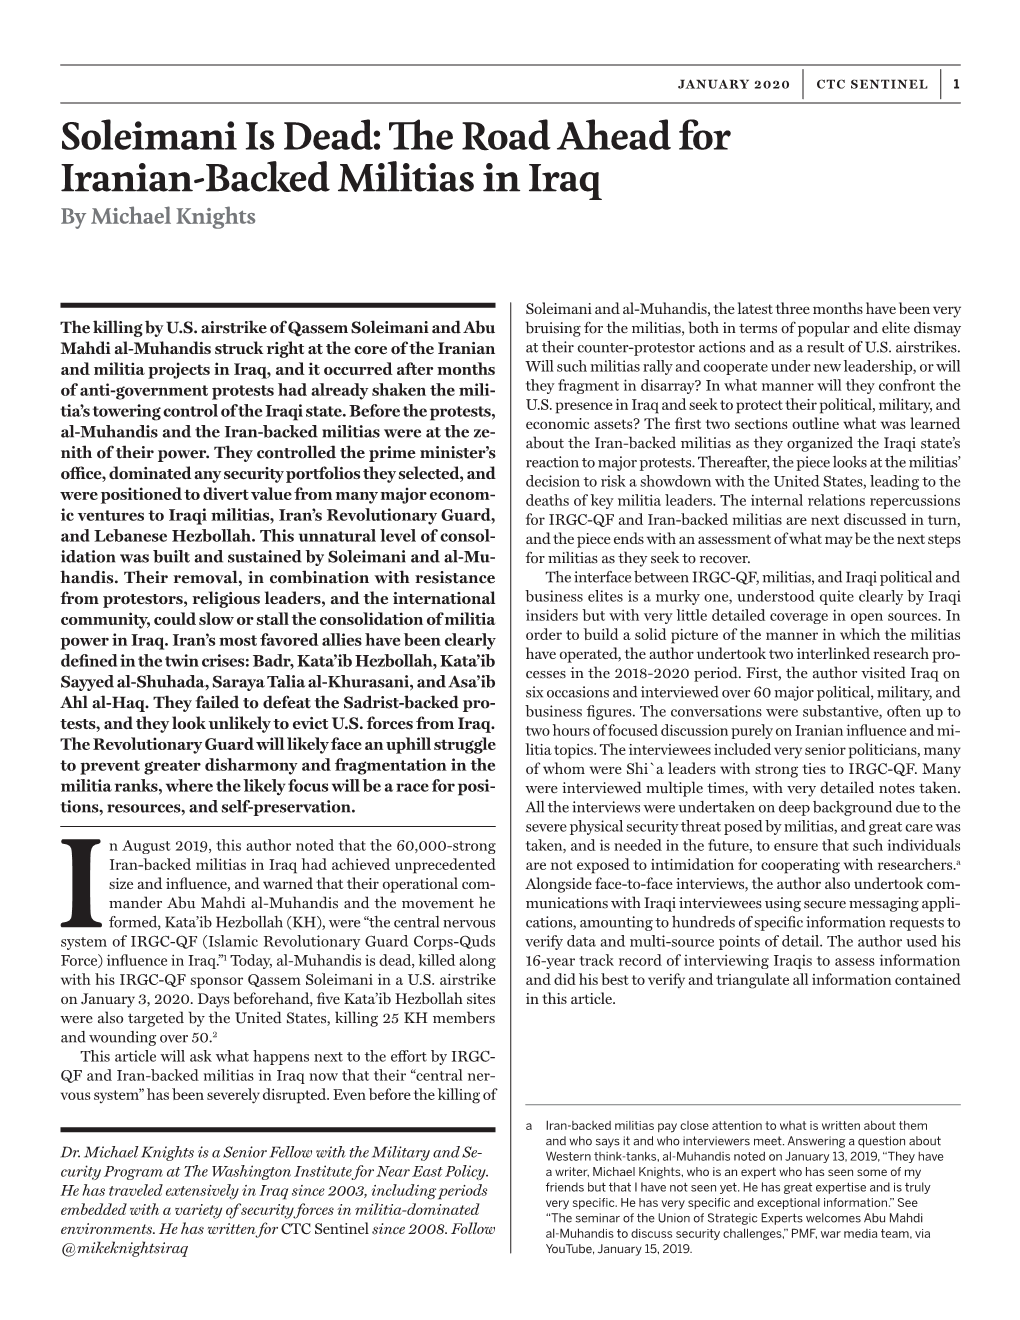 The Road Ahead for Iranian-Backed Militias in Iraq by Michael Knights